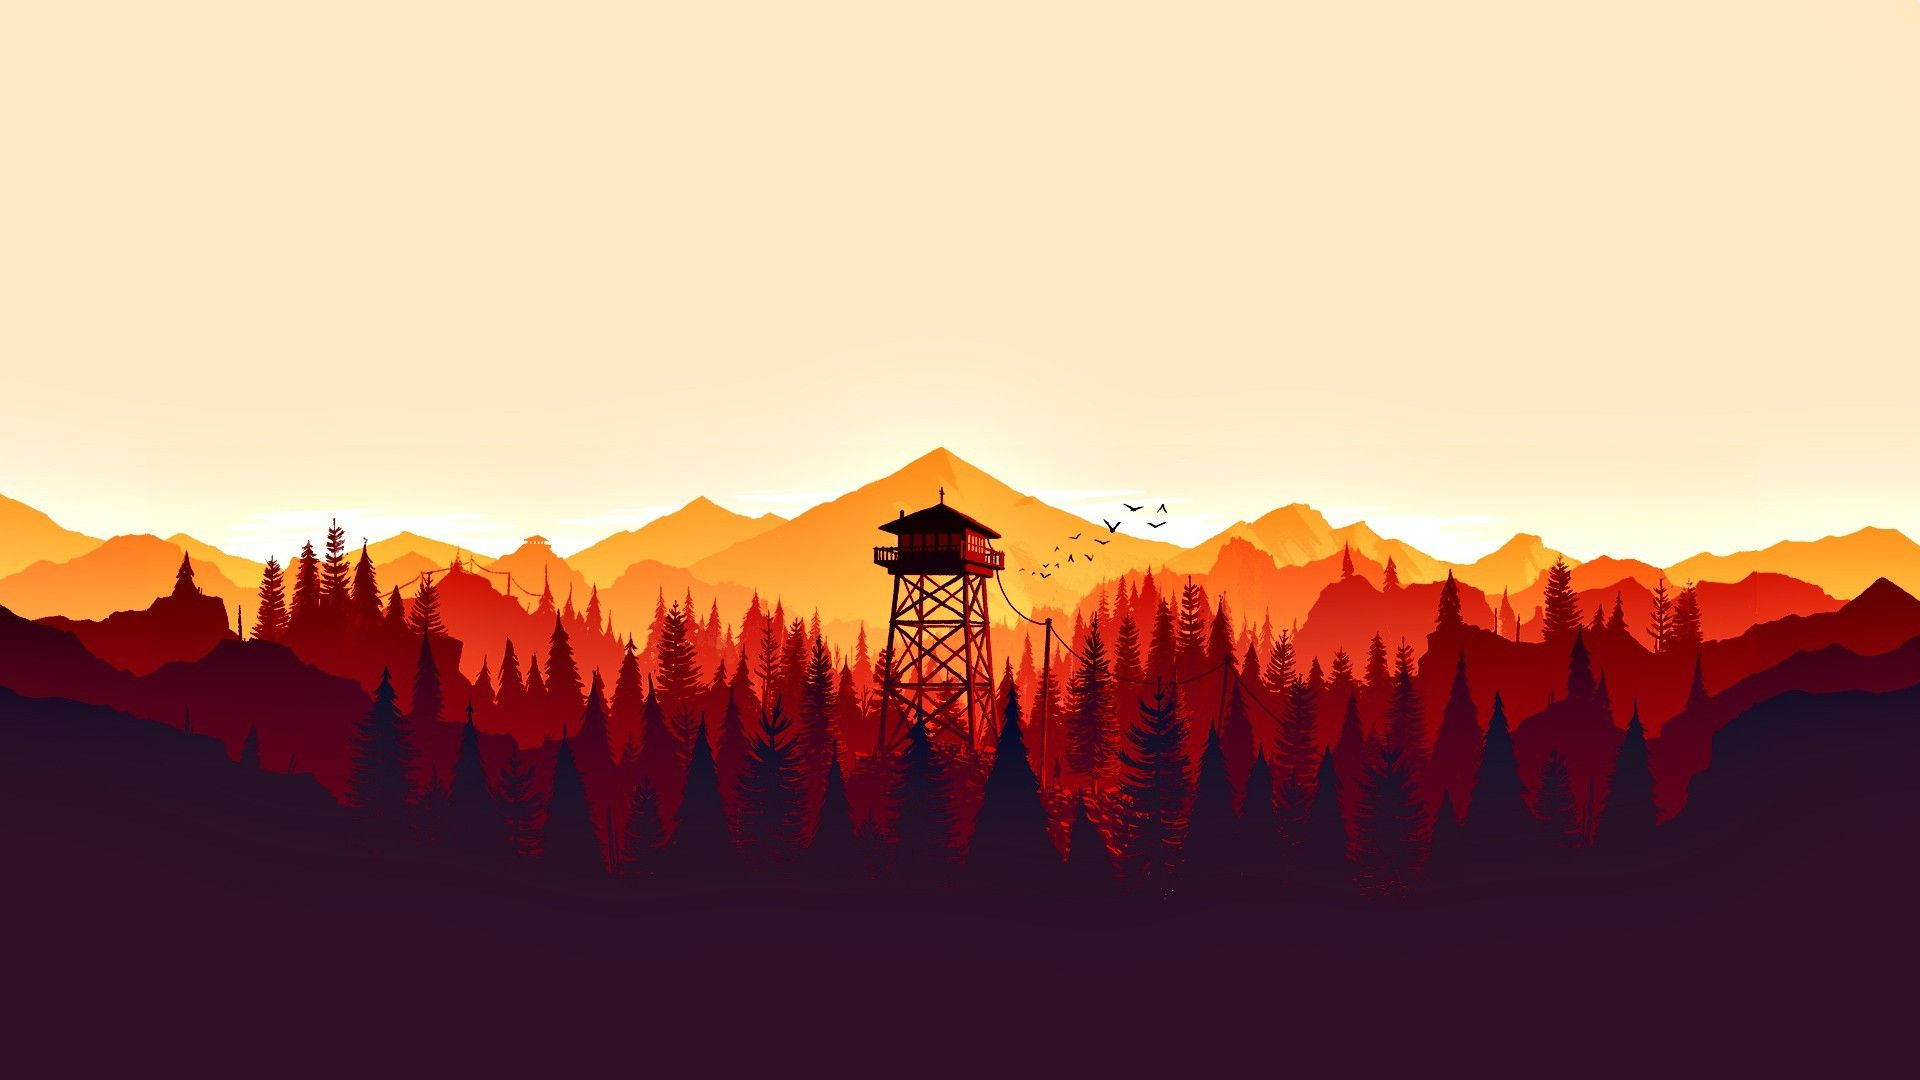 Firewatch games with your girlfriend